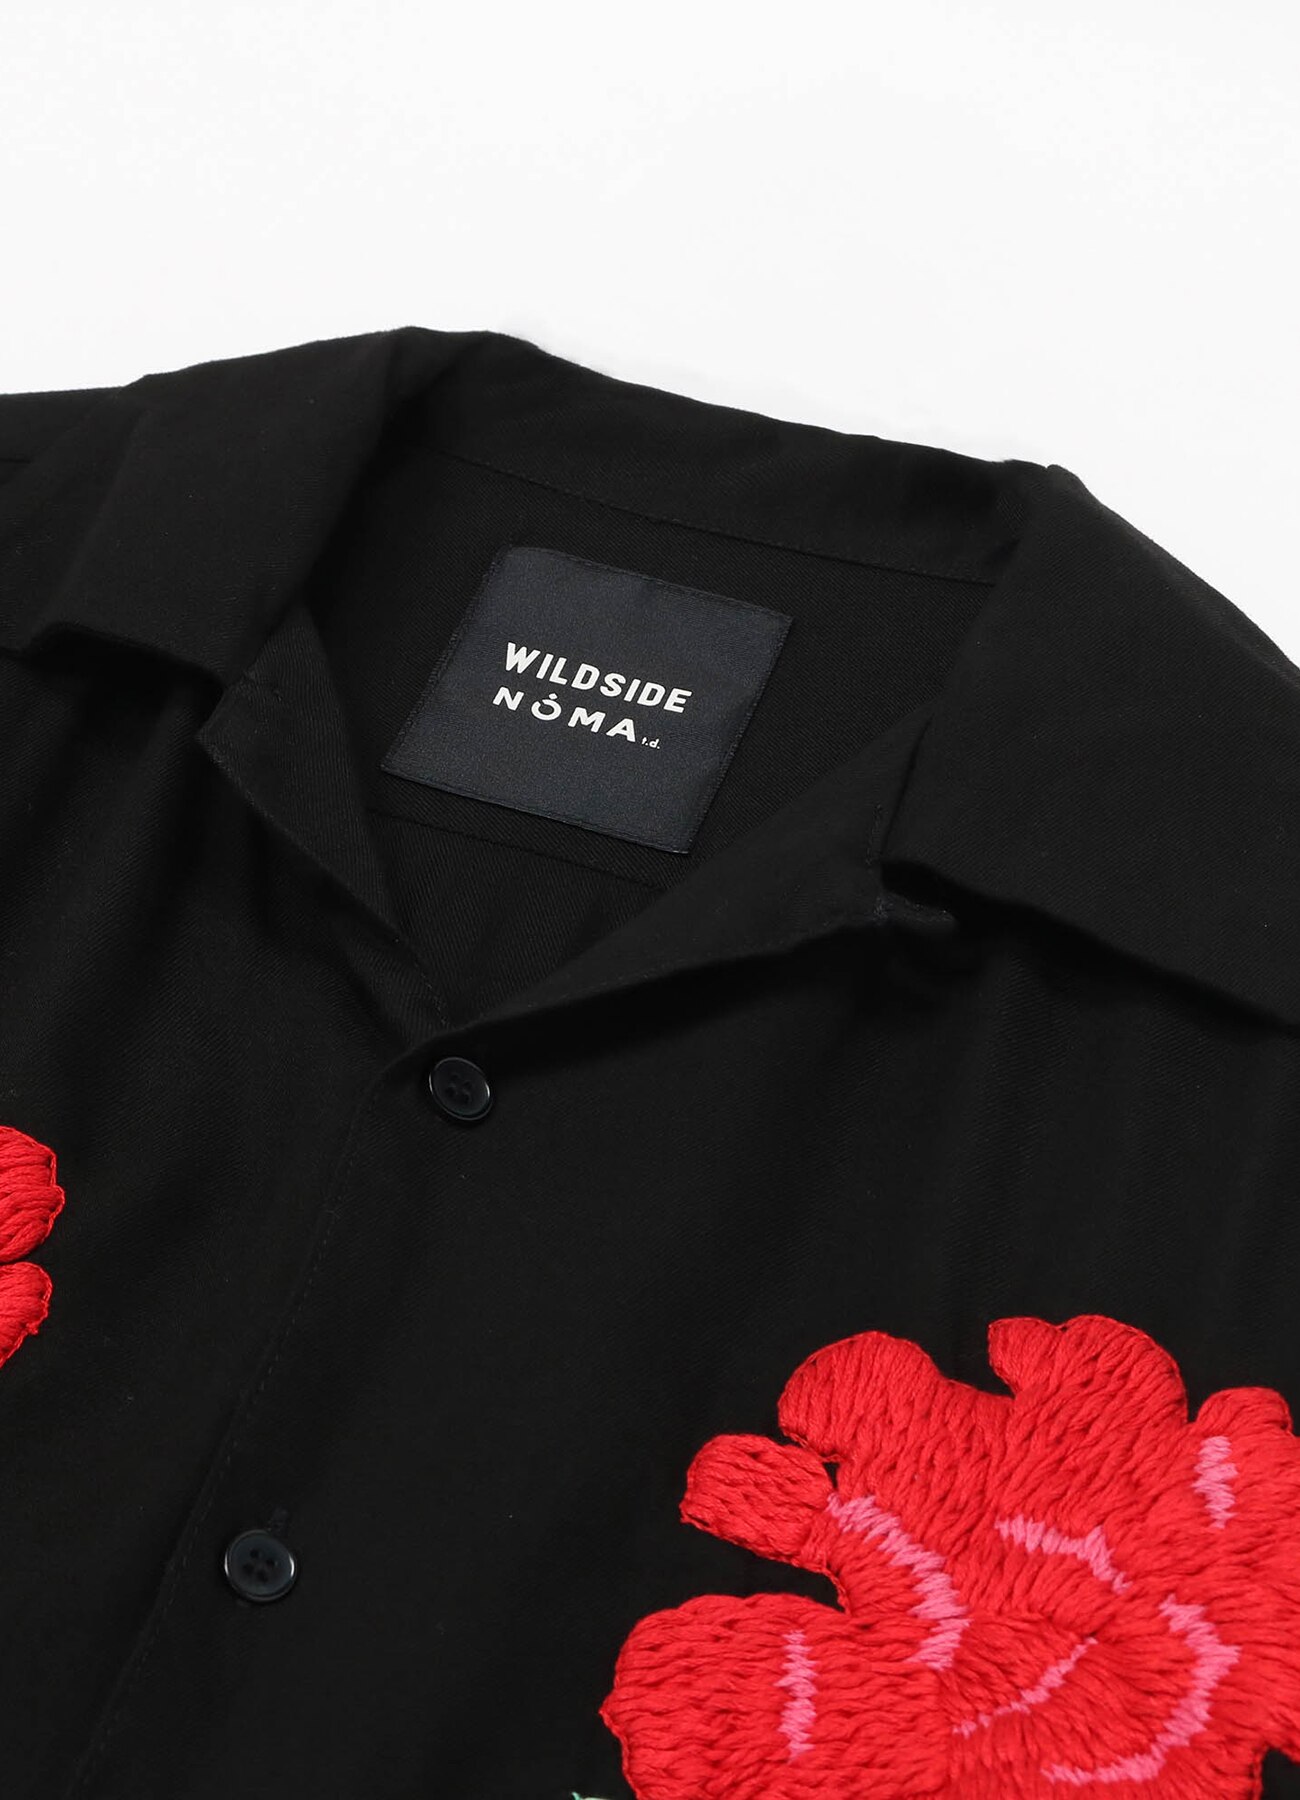 WILDSIDE × NOMA t.d. HAND EMBROIDERY Shirt(M BLACK): NOMAbloc